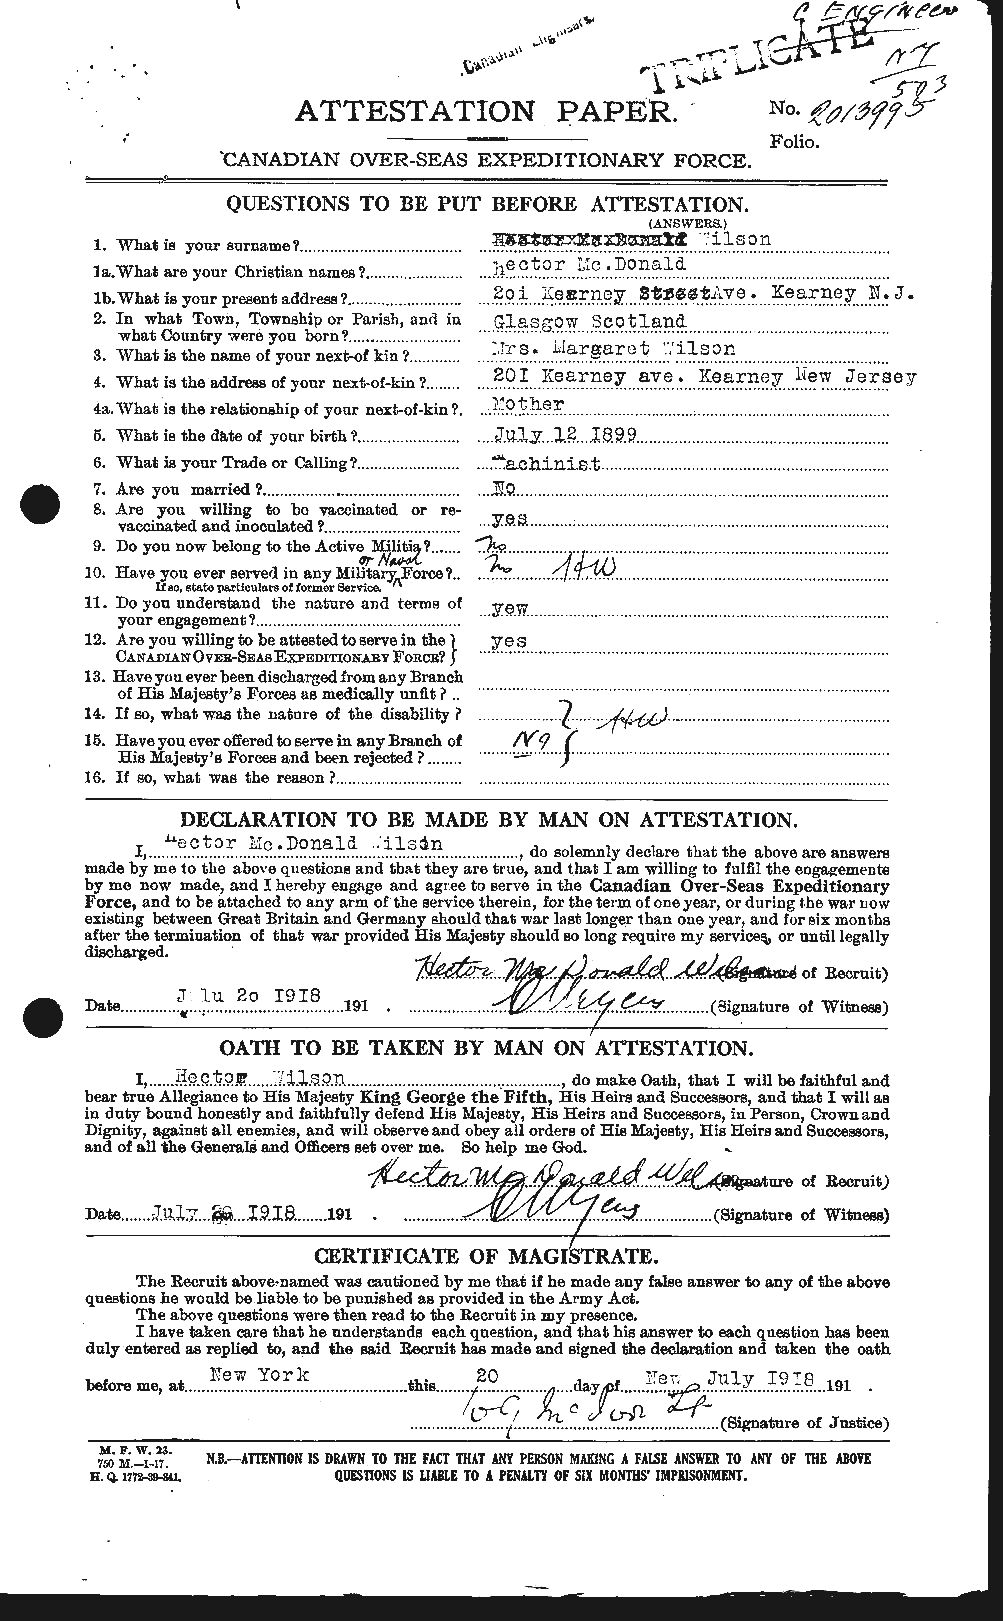 Personnel Records of the First World War - CEF 679489a